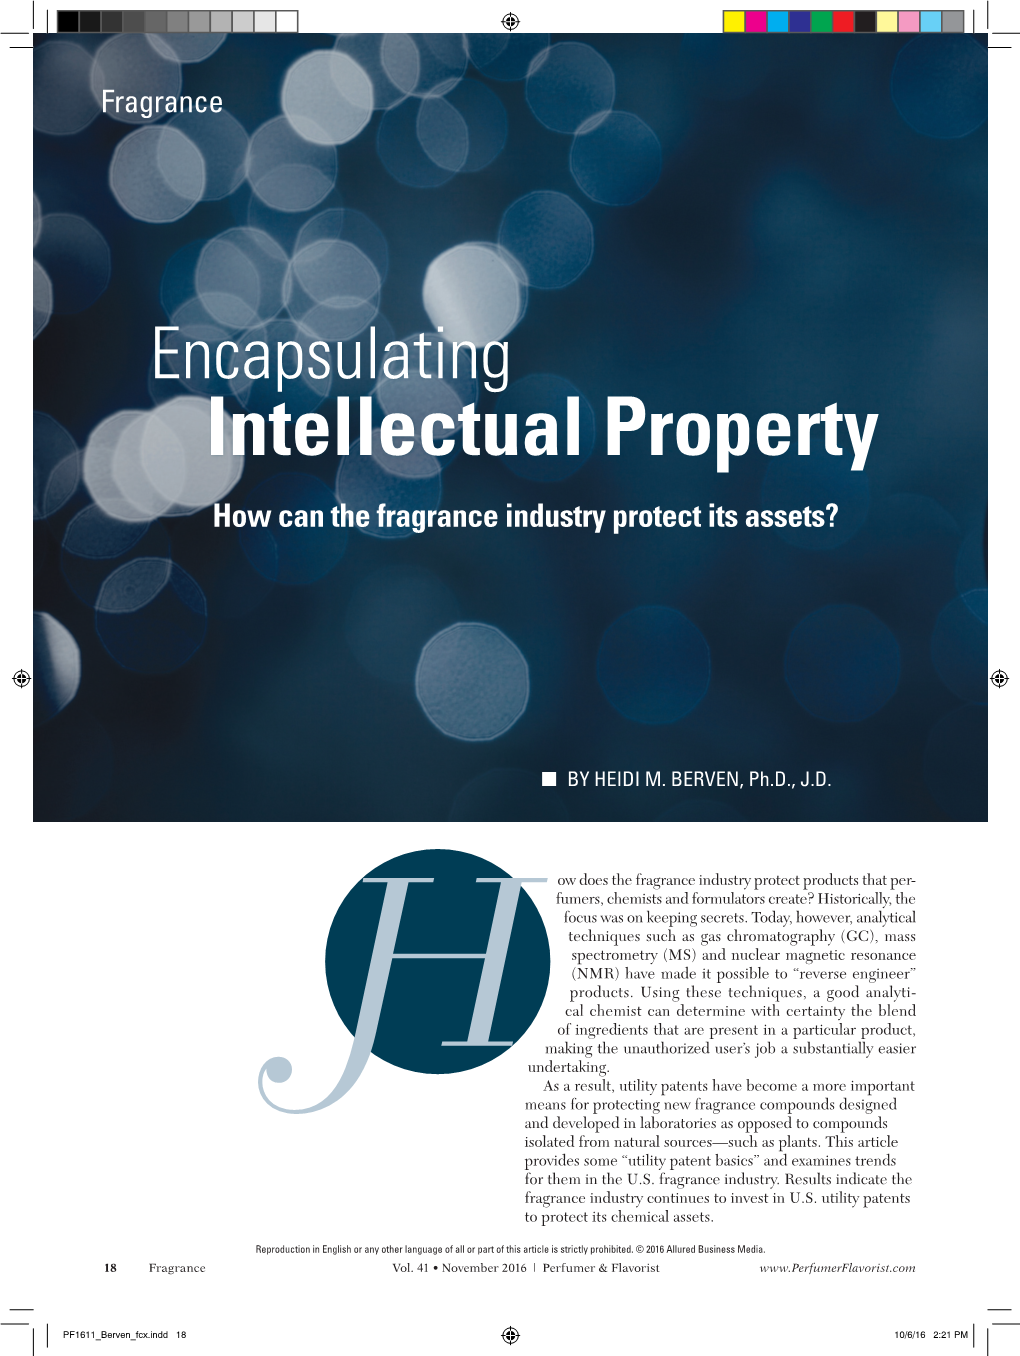 Encapsulating Intellectual Property How Can the Fragrance Industry Protect Its Assets?